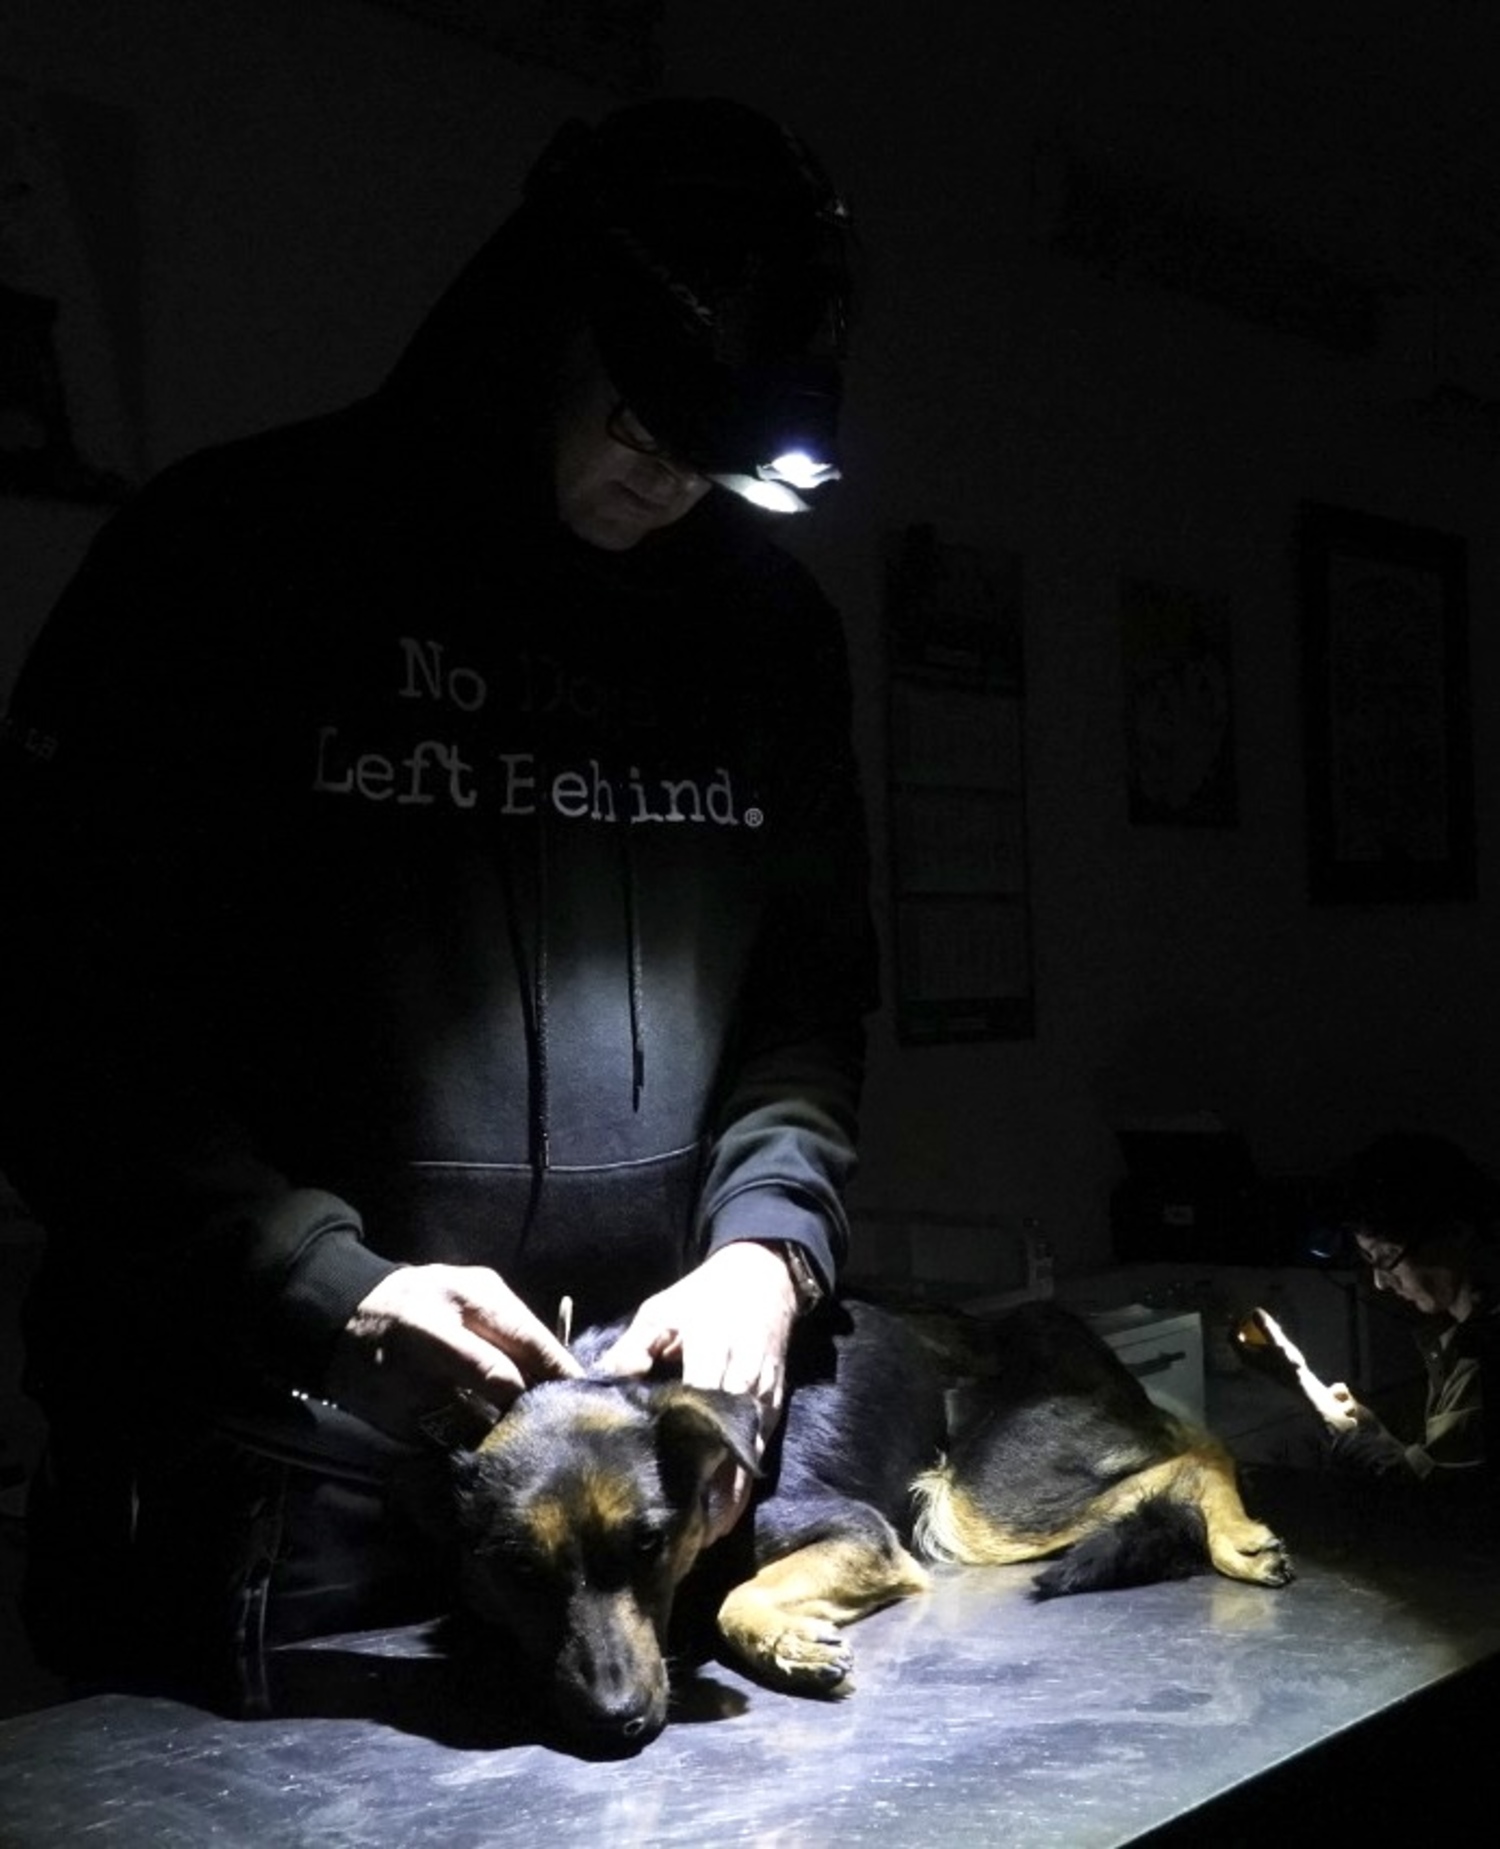 Candy receiving emergency treatment after being rescued in Kherson, Ukraine.